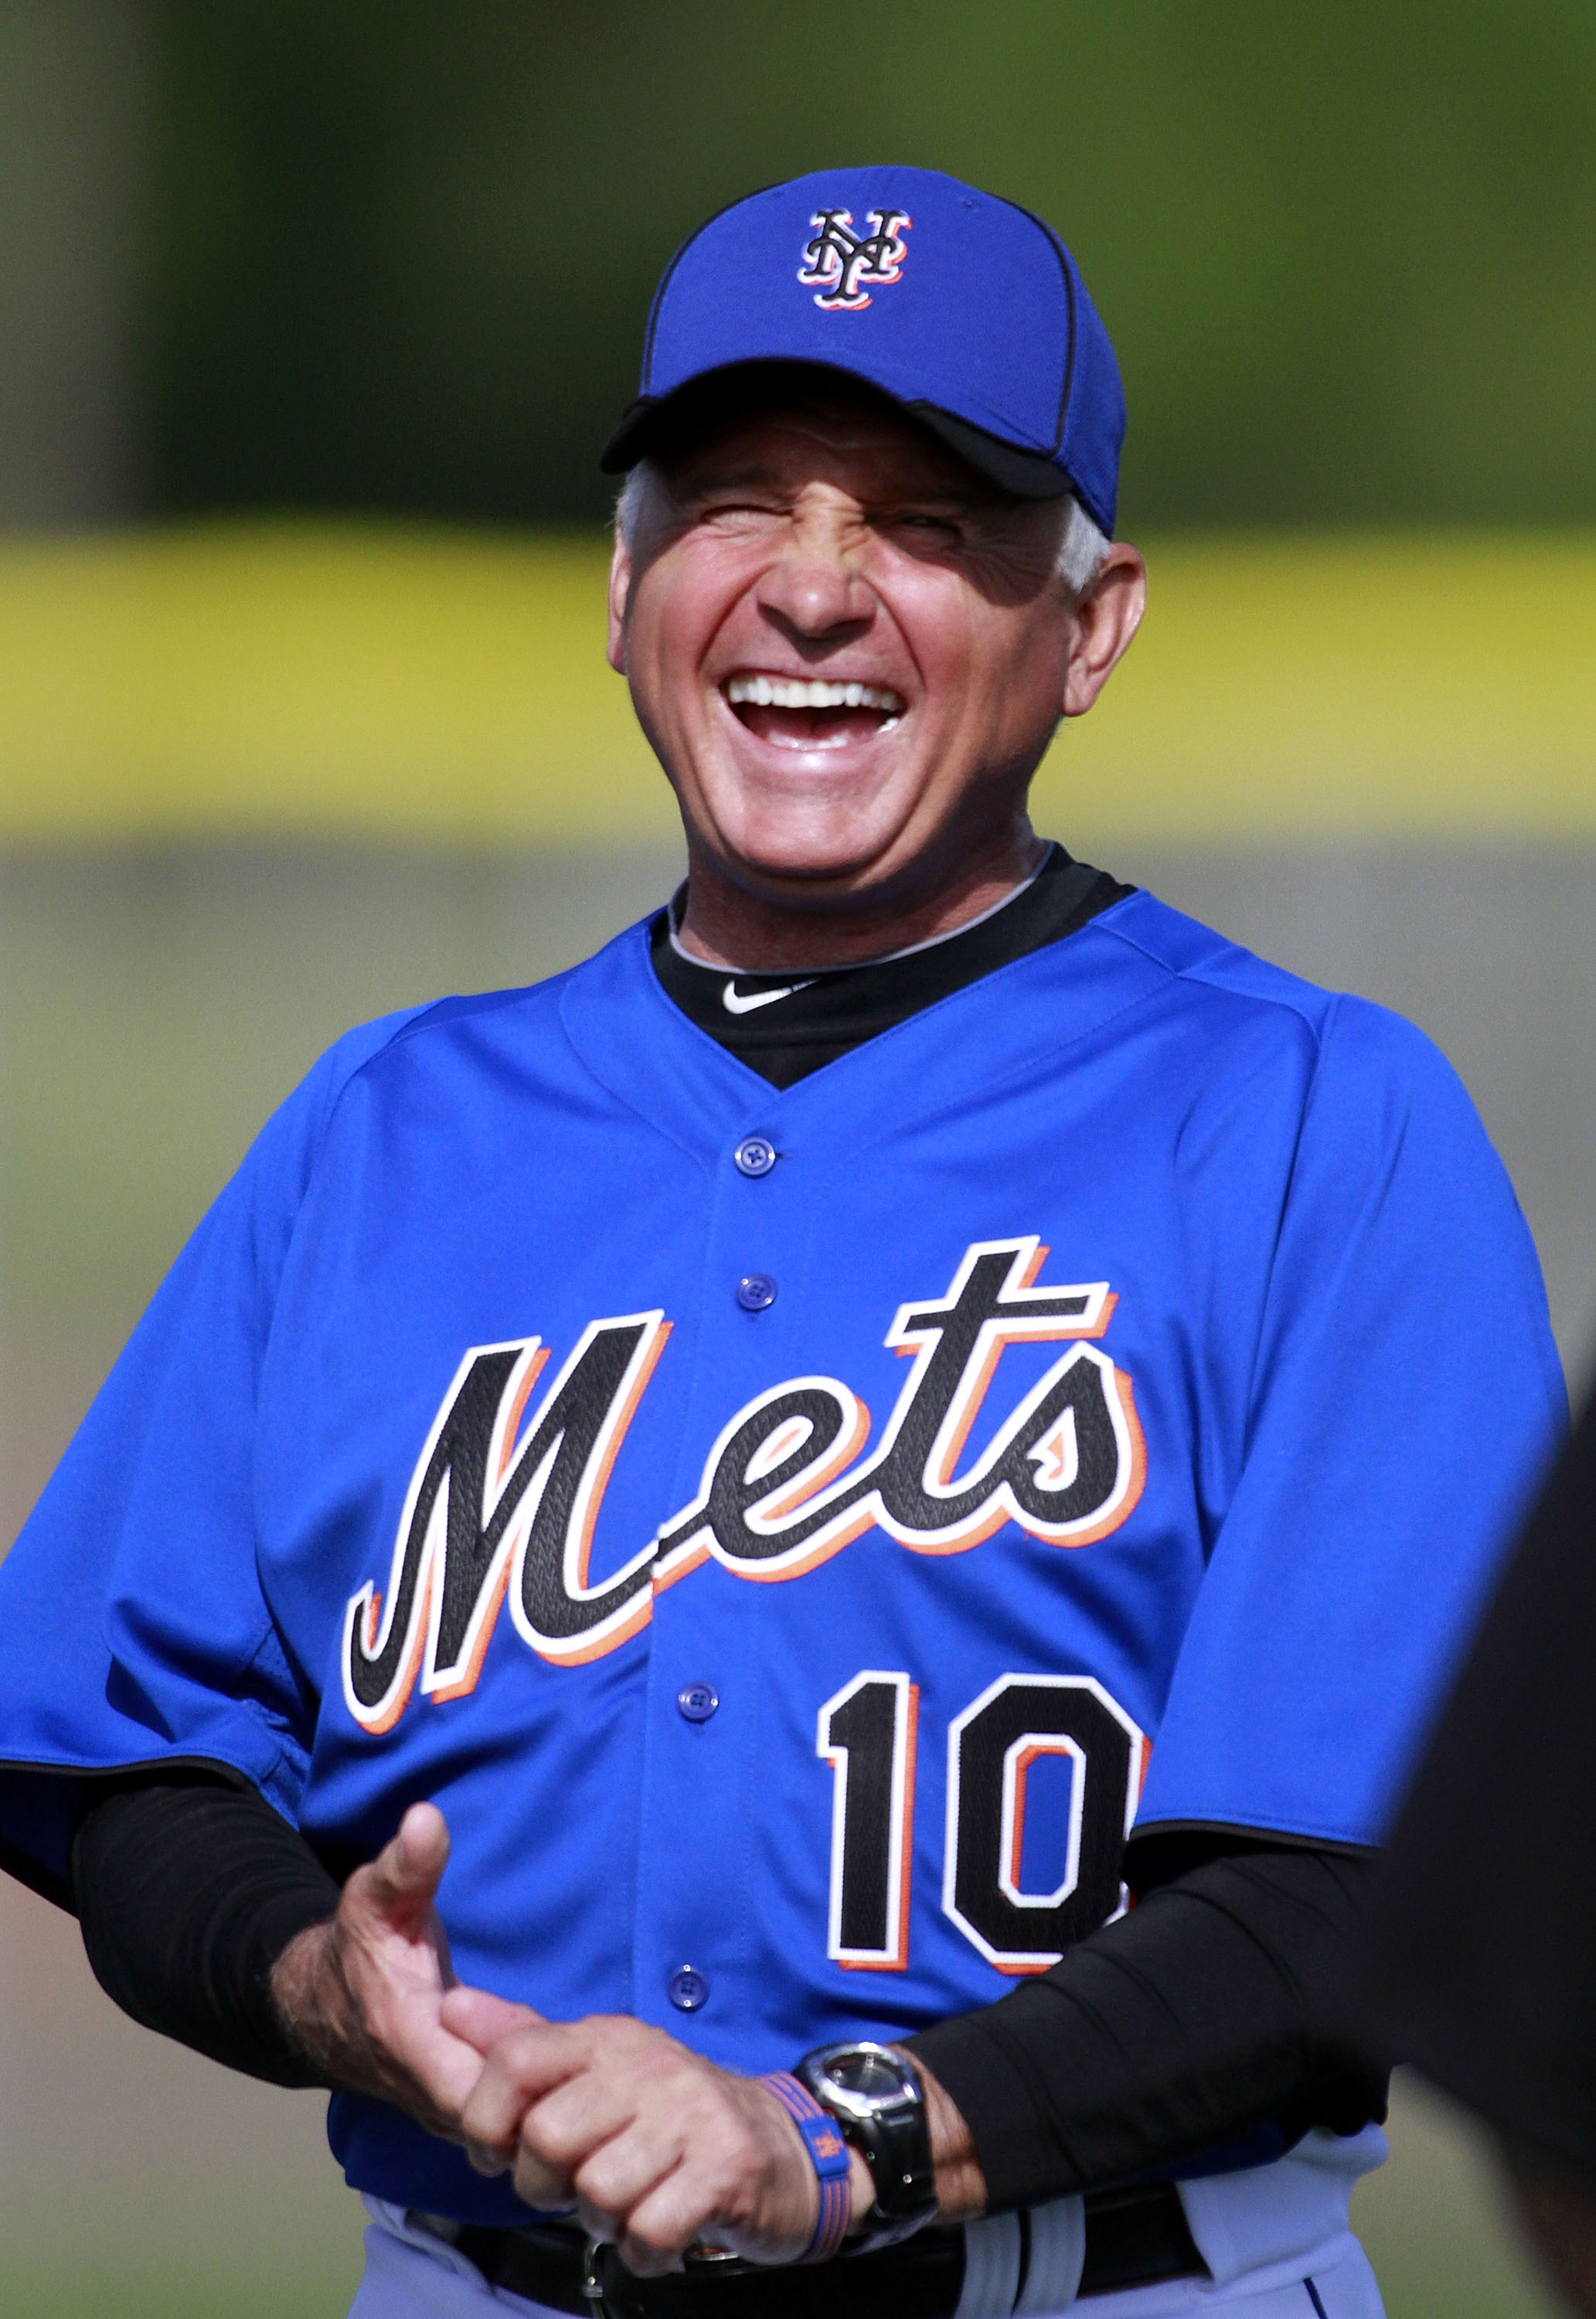 PORT ST. LUCIE, FL - FEBRUARY 17:  Manager Terry Collins #10 of the New York Mets laughs during spring training at Tradition Field on February 17, 2011 in Port St. Lucie, Florida.  (Photo by Marc Serota/Getty Images)